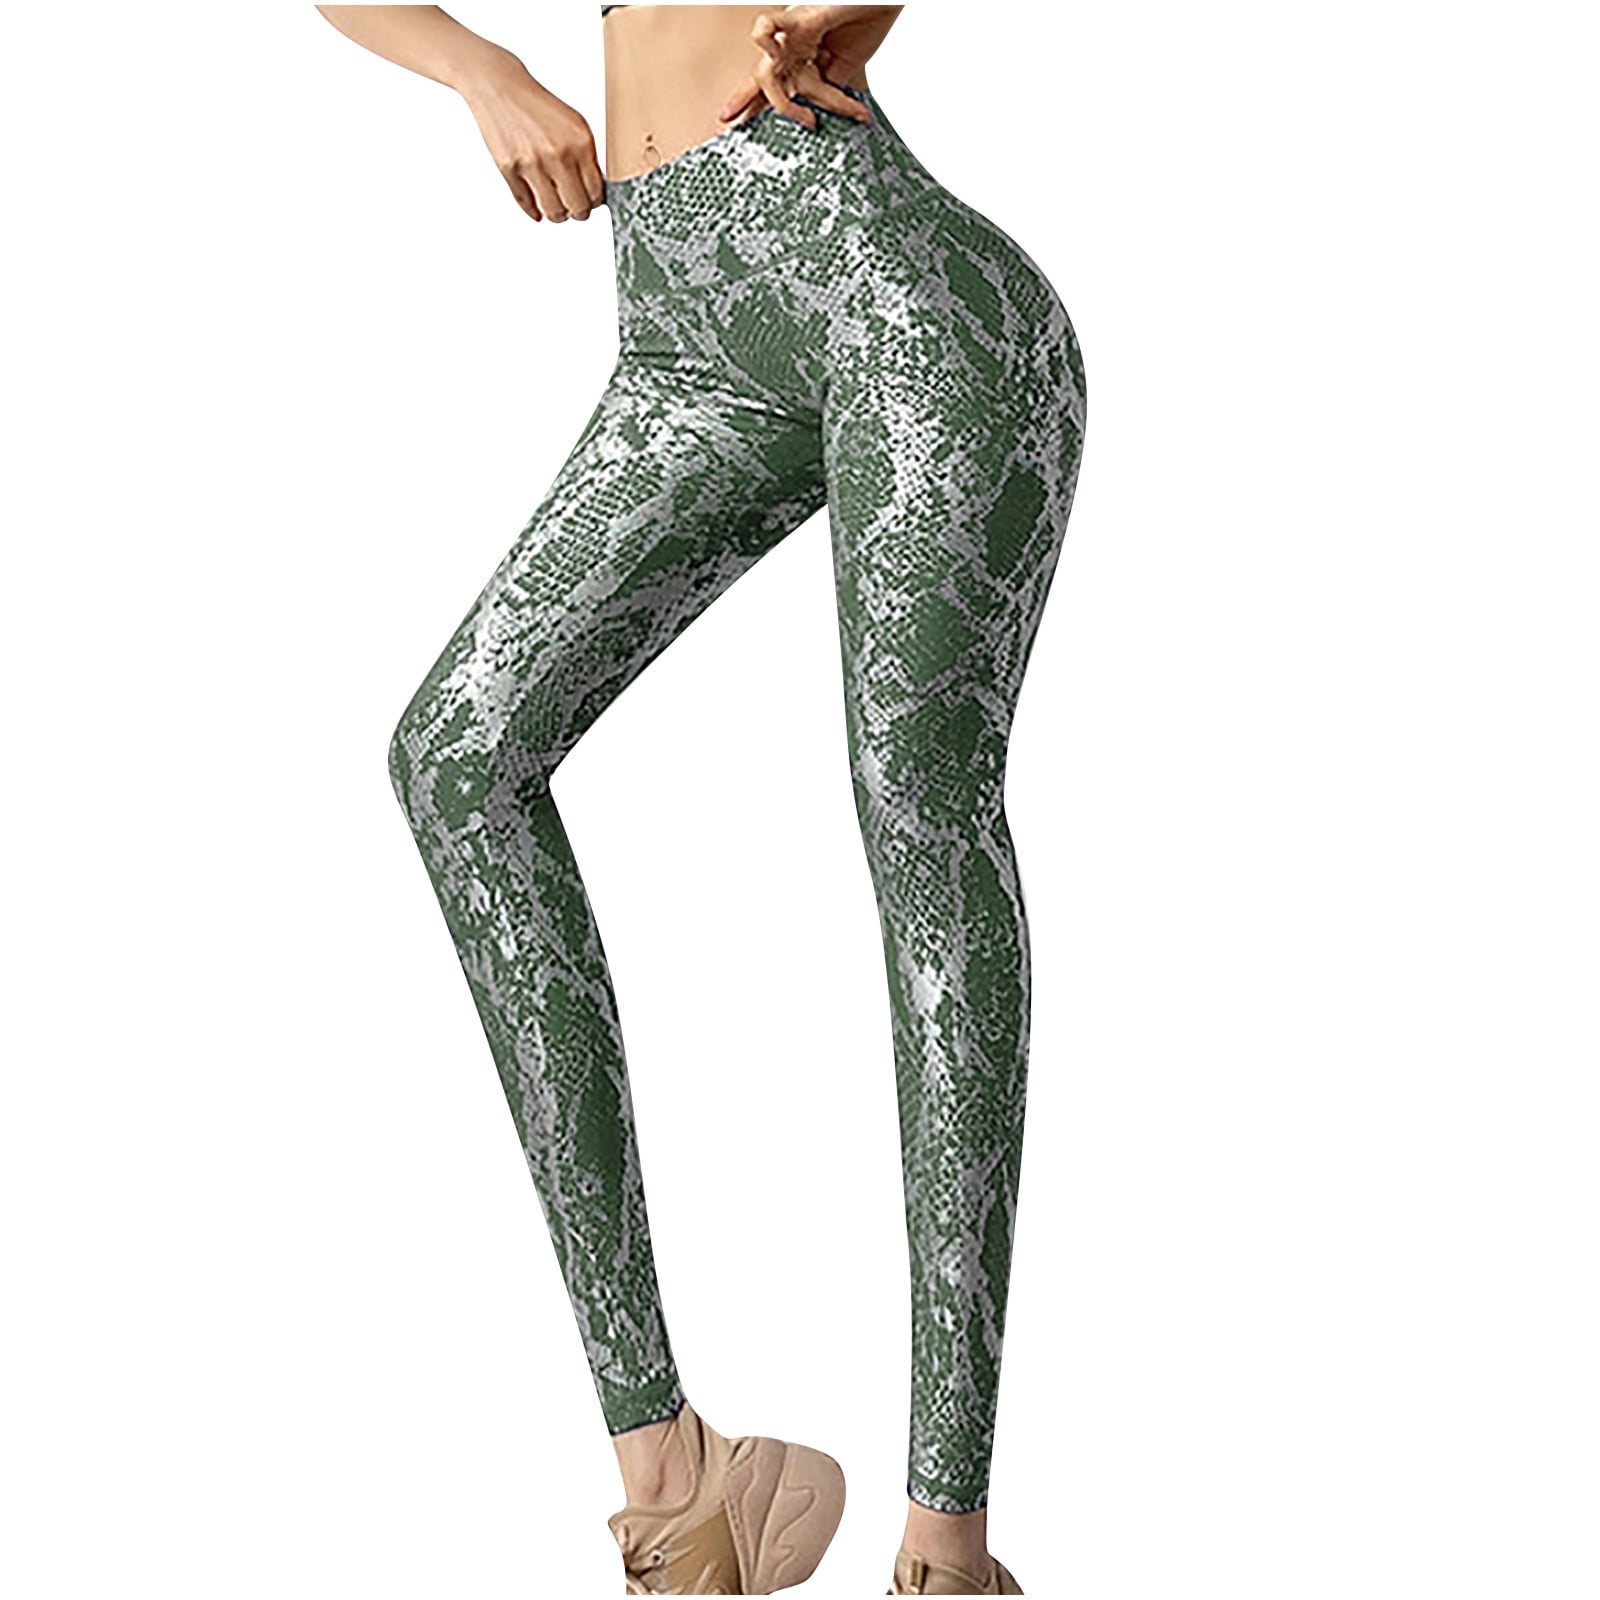 MELDVDIB Thick High Waist Serpentine Yoga Pants, Tummy Control Stretchy  Workout Running Yoga Leggings for Women on Clearance 